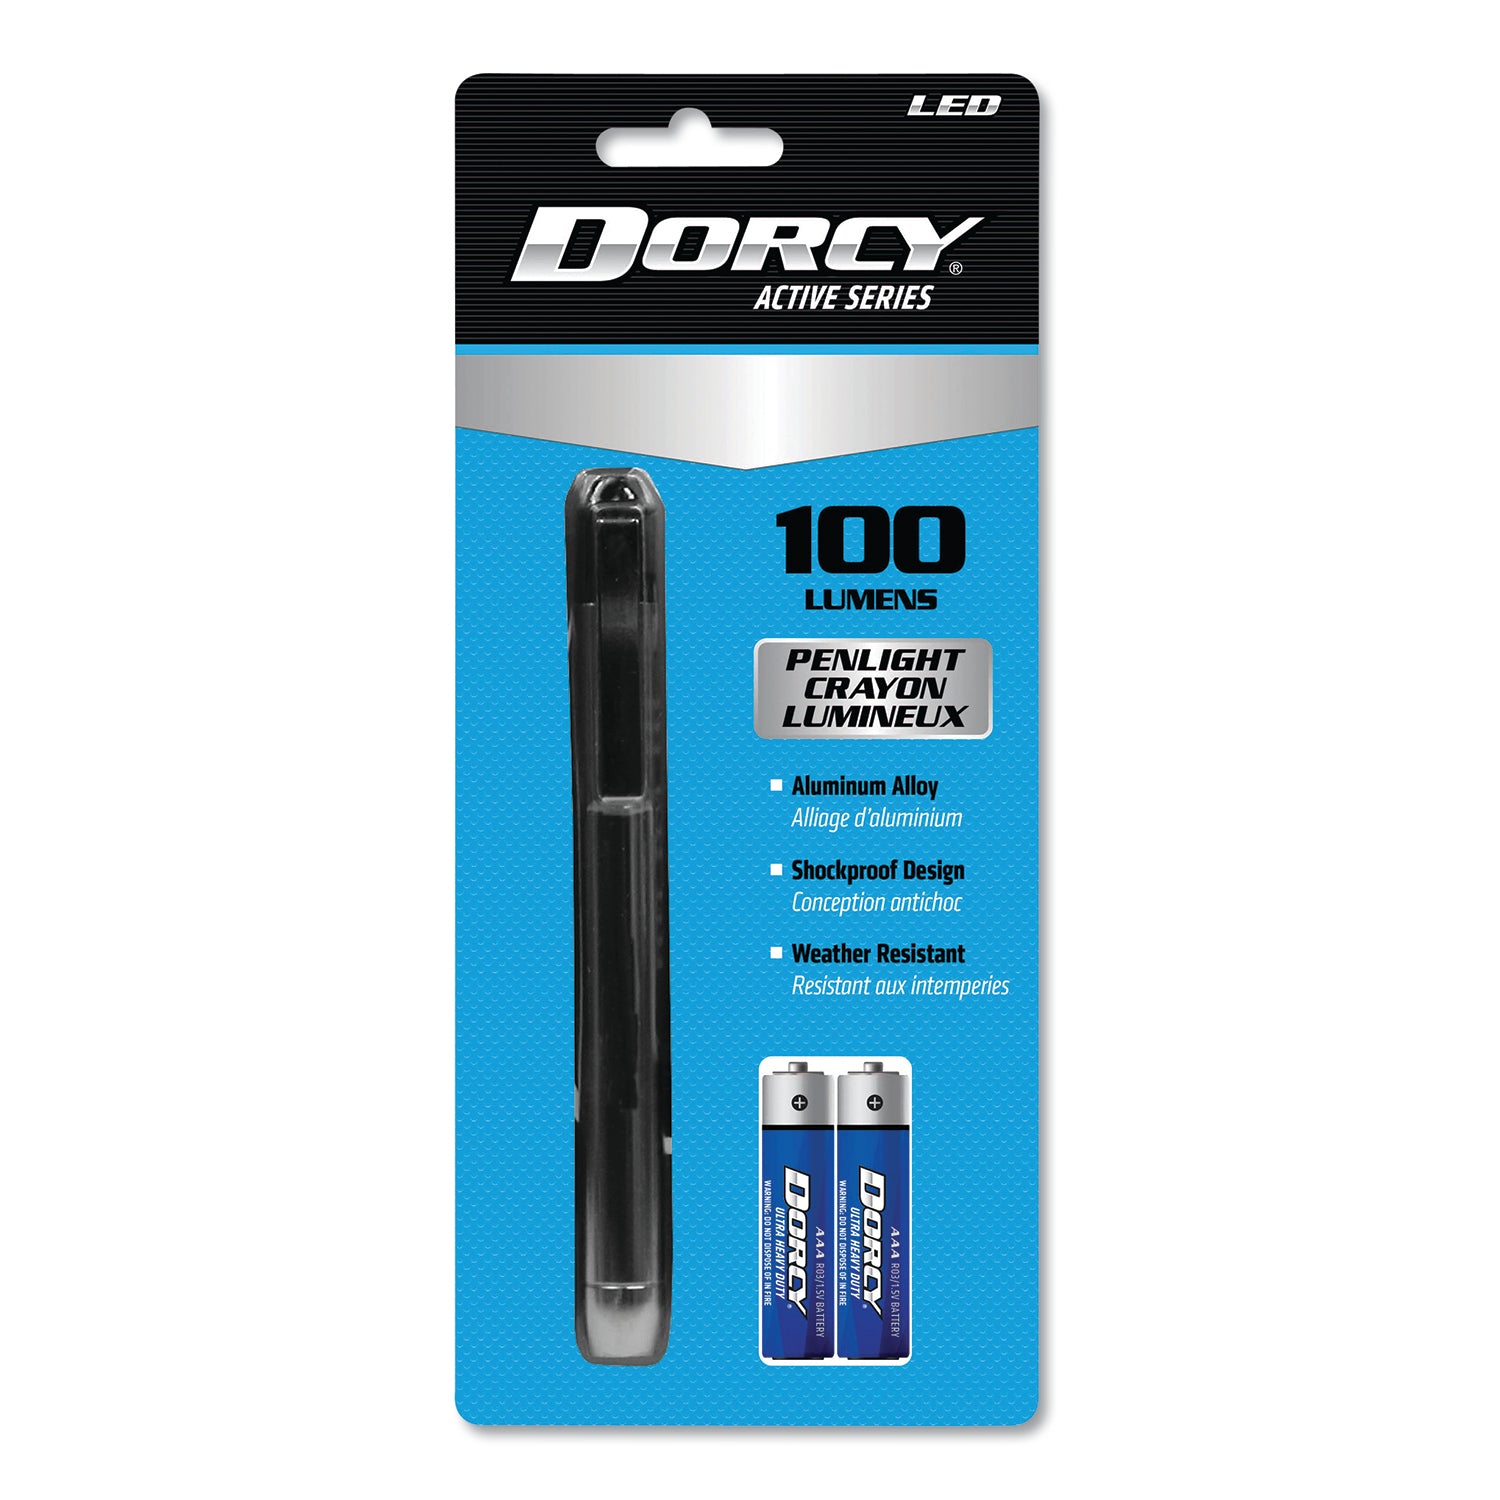 100-lumen-led-penlight-2-aaa-batteries-included-silver_dcy411218 - 2